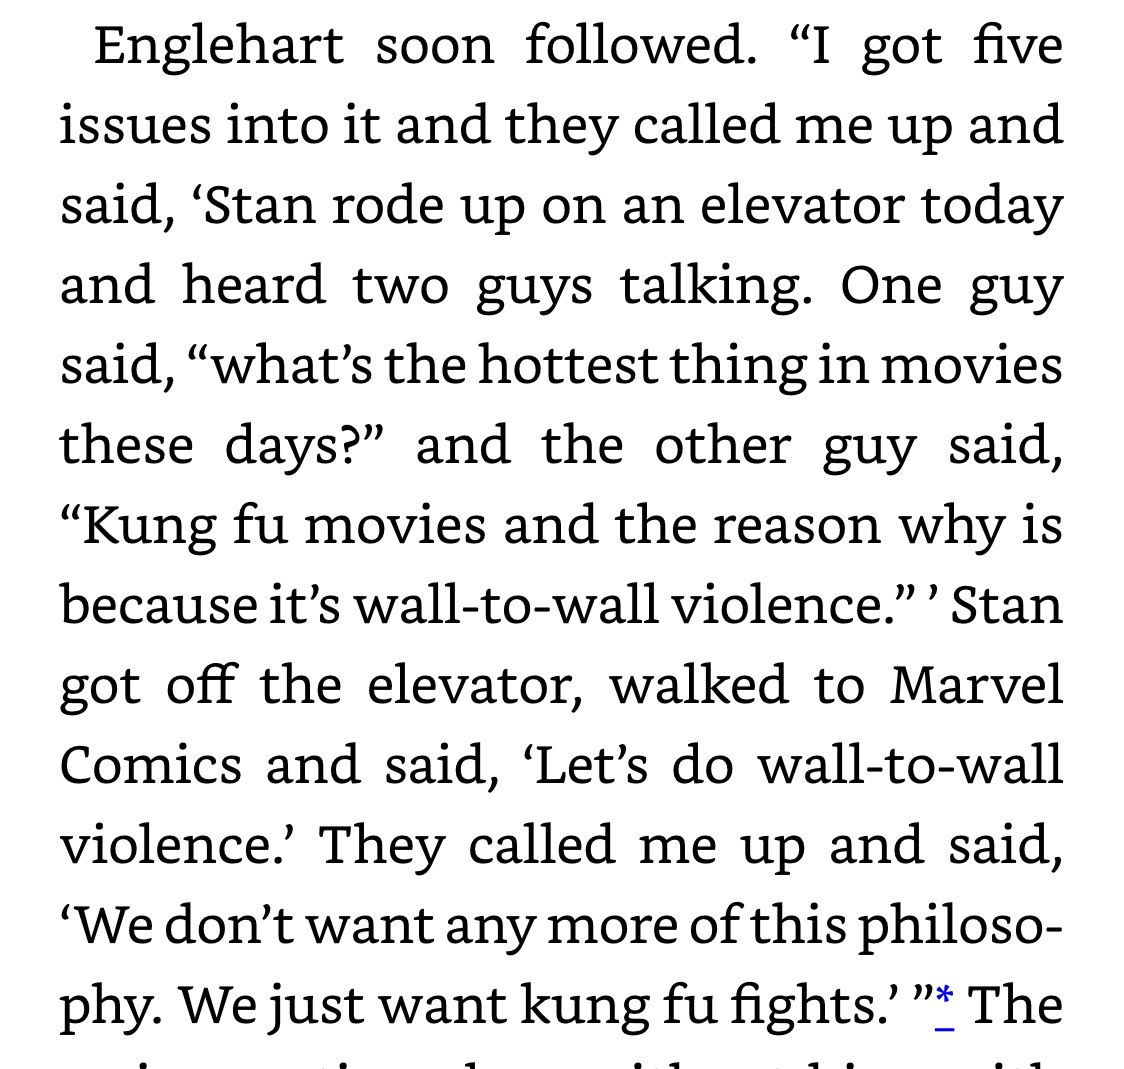 Not only was plotting directly impacted by fan feedback, Stan Lee began shifting editorial direction based on conversations he overheard in the elevator